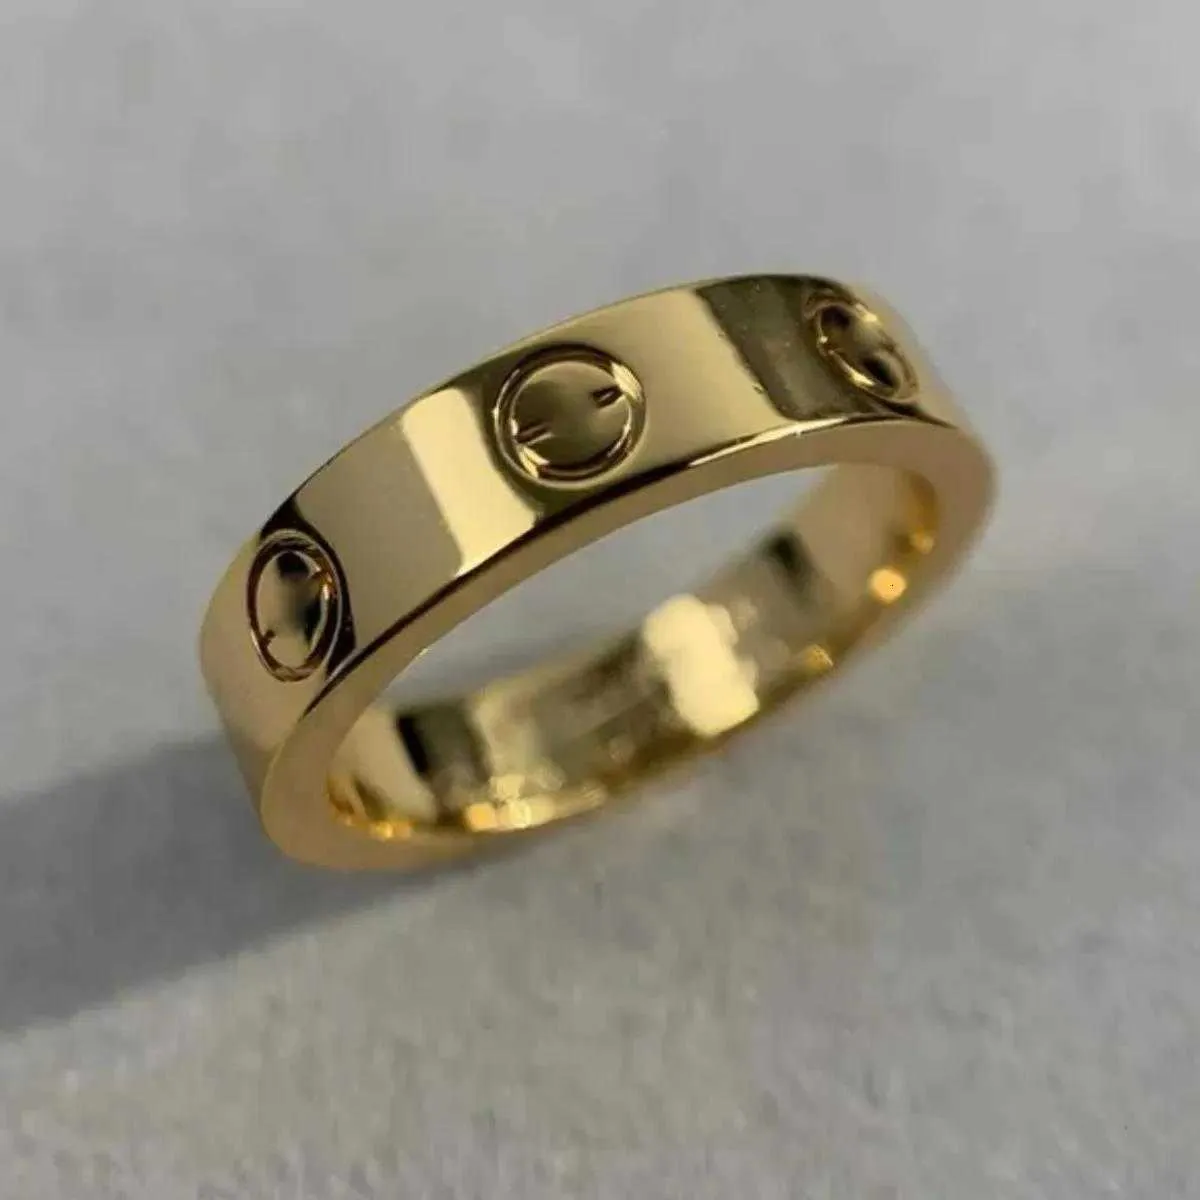 Original Engrave4 5 6mm Diamond Love Ring 18k Gold Silver Rose 316l Steel Rings Woman Man Lover Wedding Jewelry Lady Party 6 7 8 9 10 11 Big Usa Size